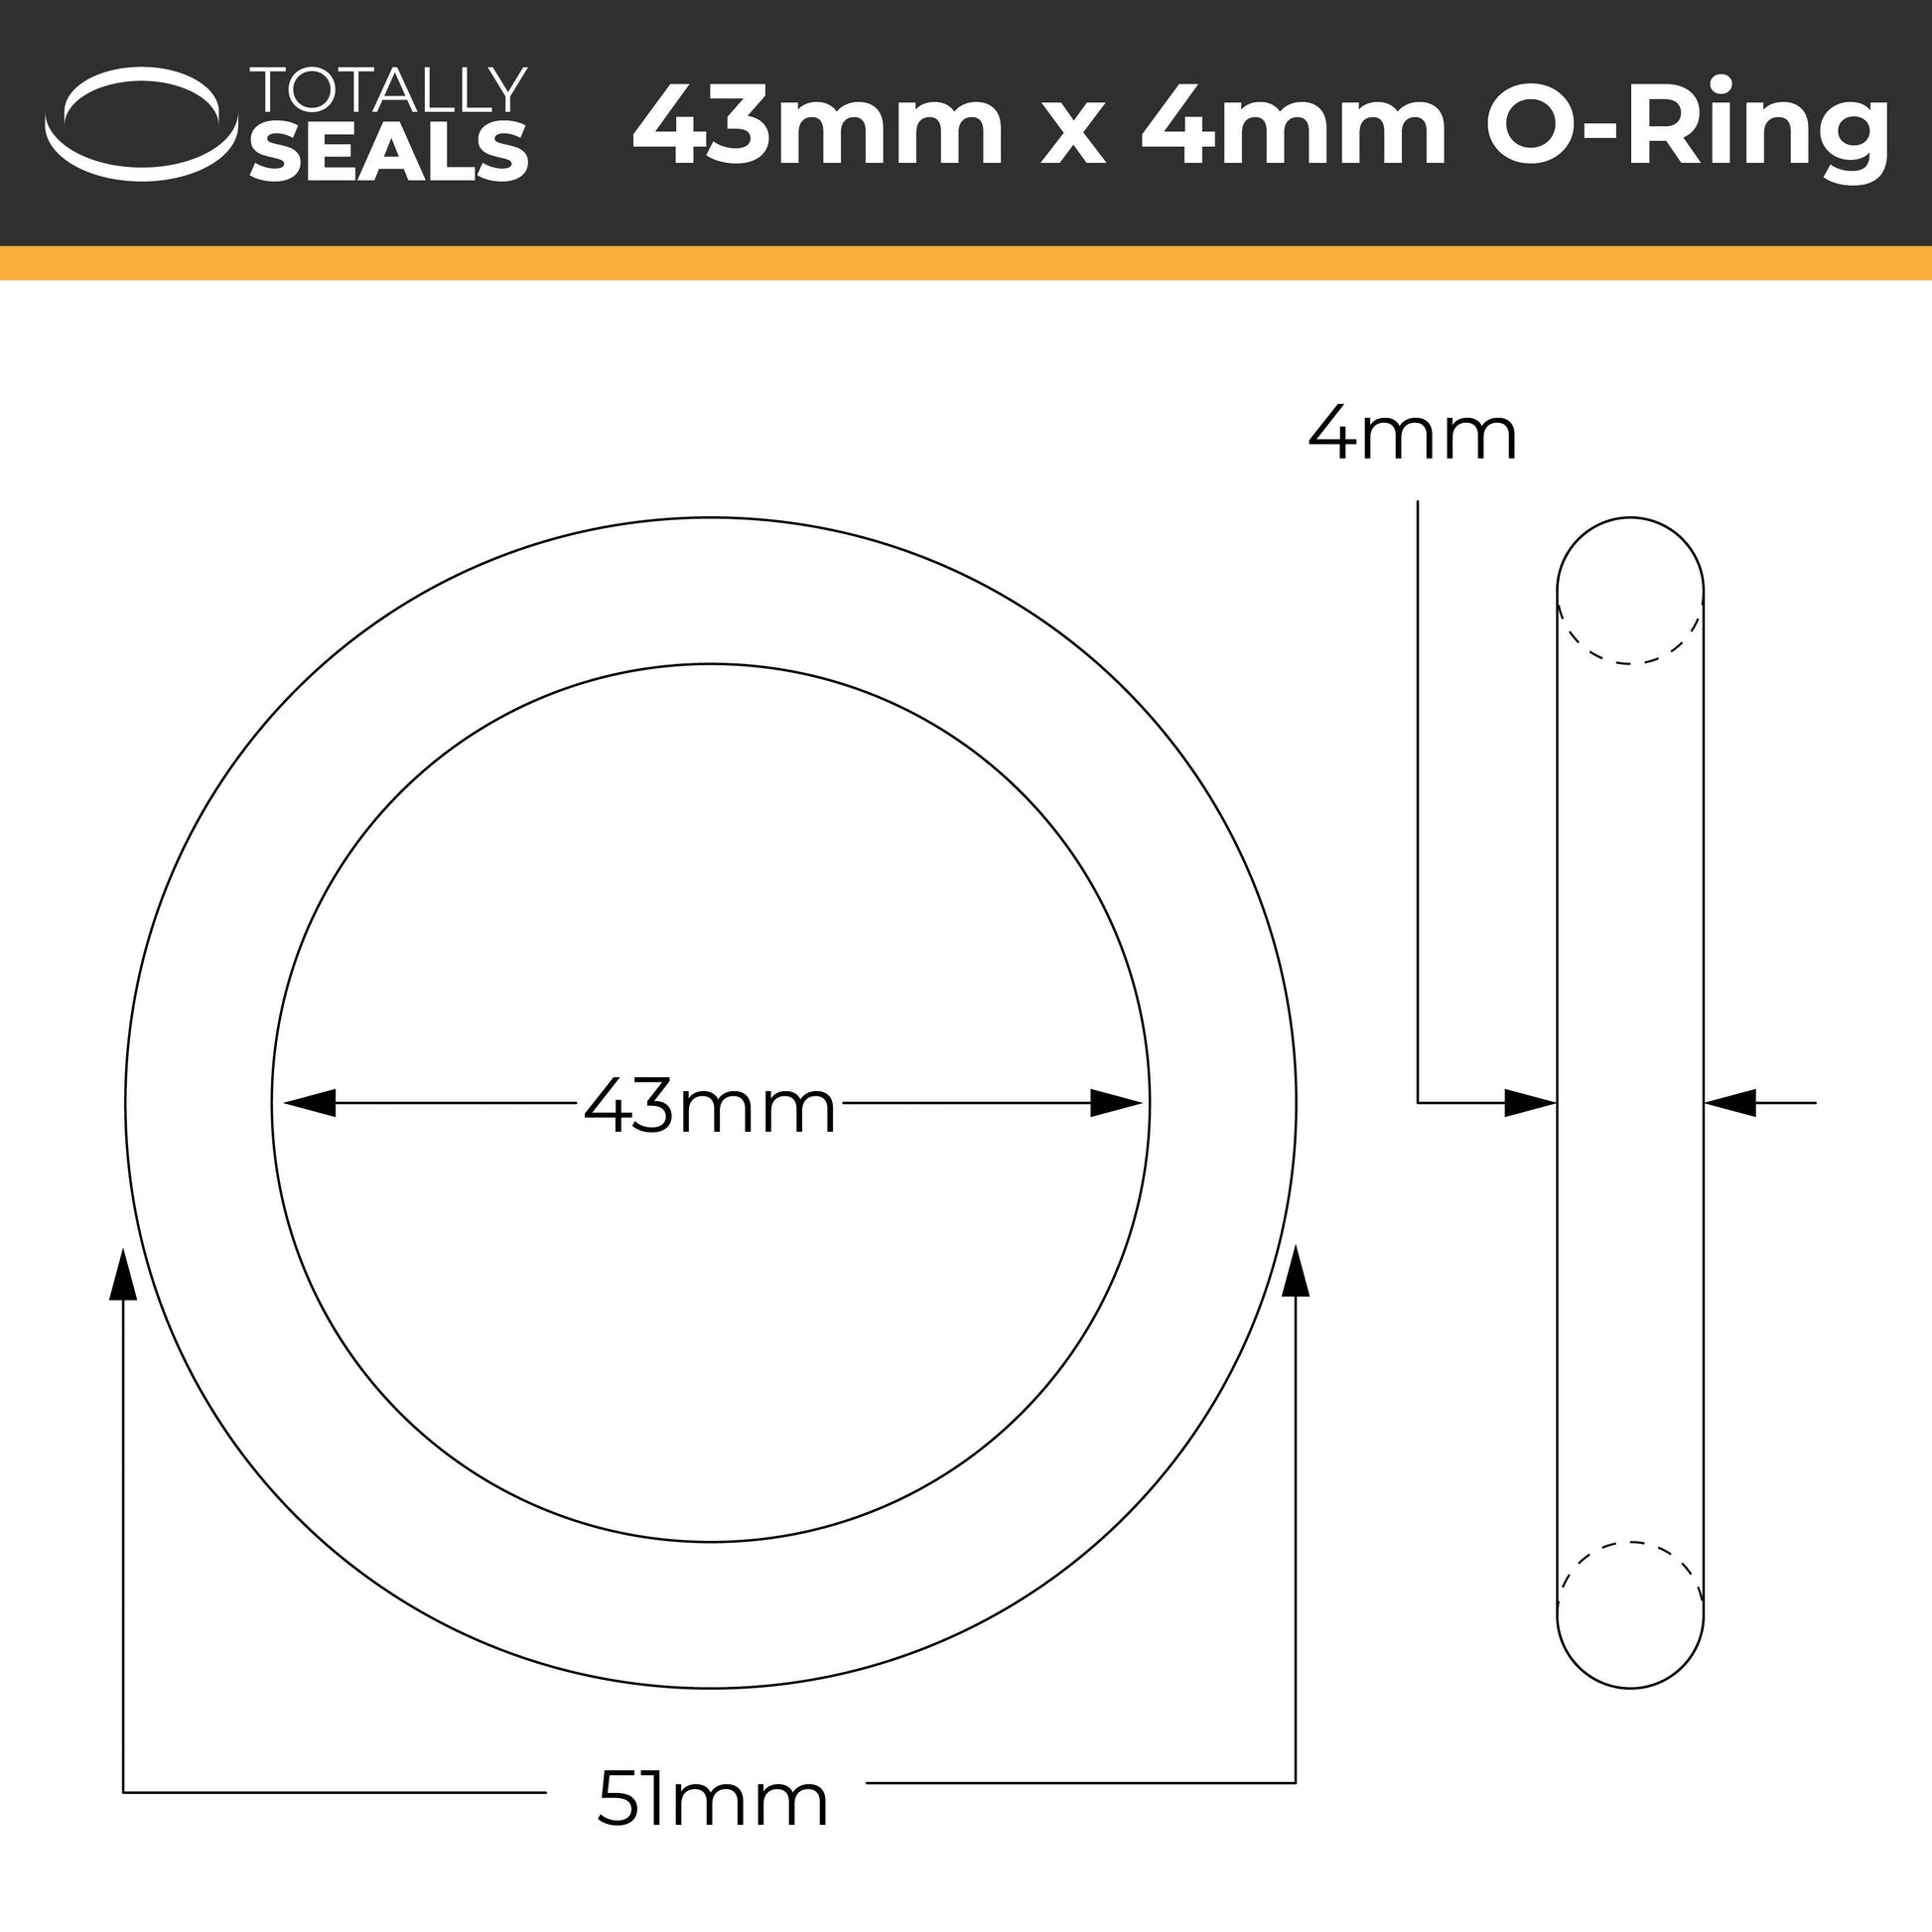 43mm x 4mm (51mm OD) Nitrile O-Rings - Totally Seals®